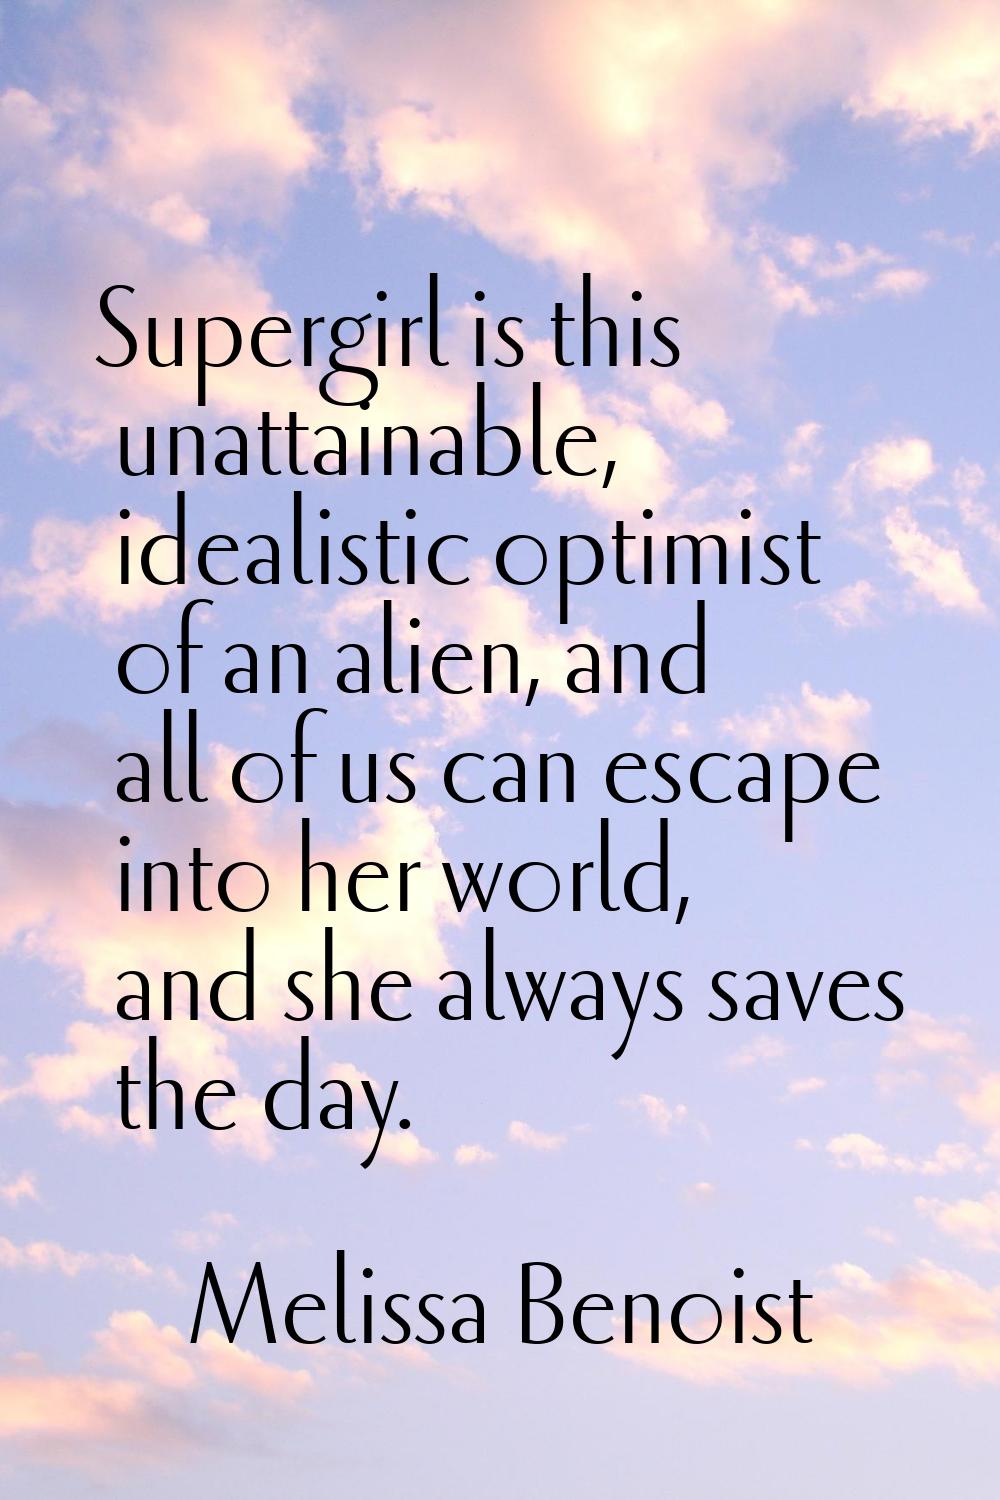 Supergirl is this unattainable, idealistic optimist of an alien, and all of us can escape into her 